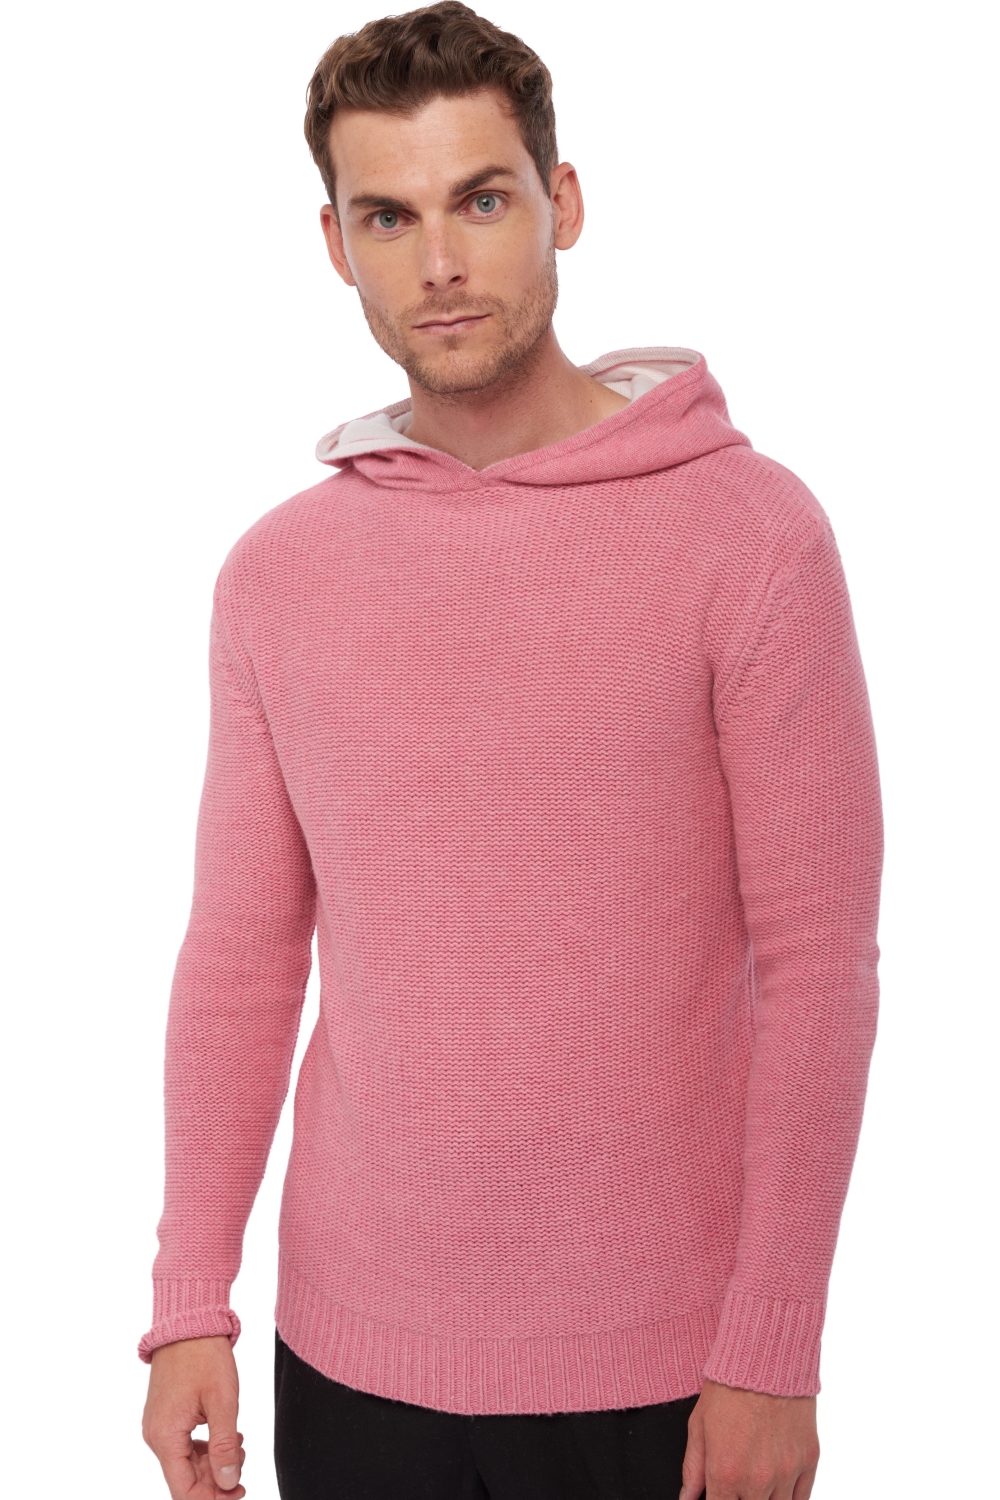 Yak yak vicuna yak for men conor pink off white 2xl